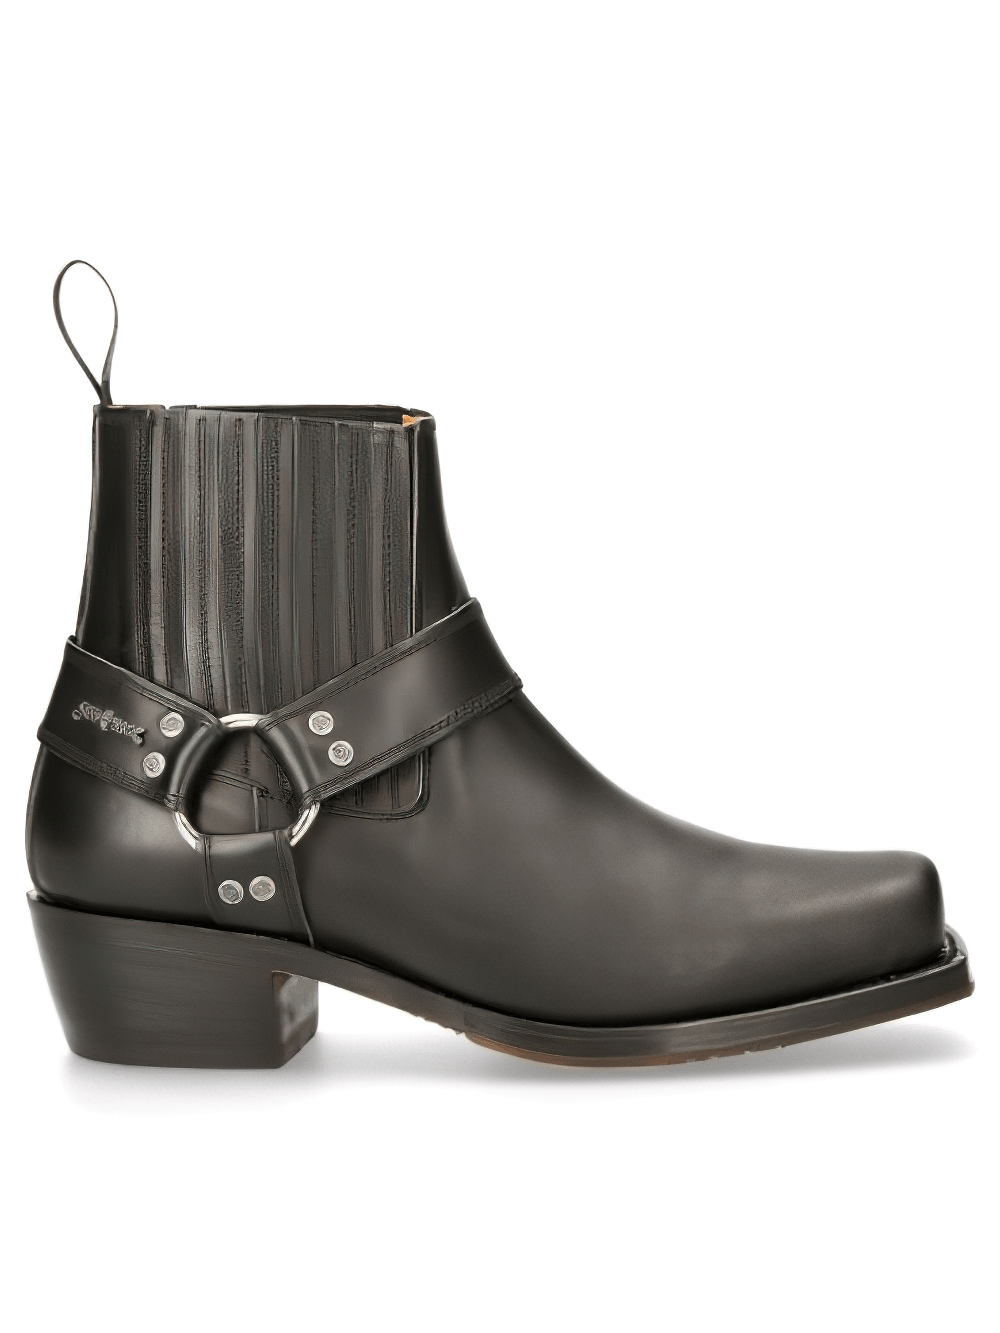 NEW ROCK Chic Black Ankle Boots with Buckle Detail